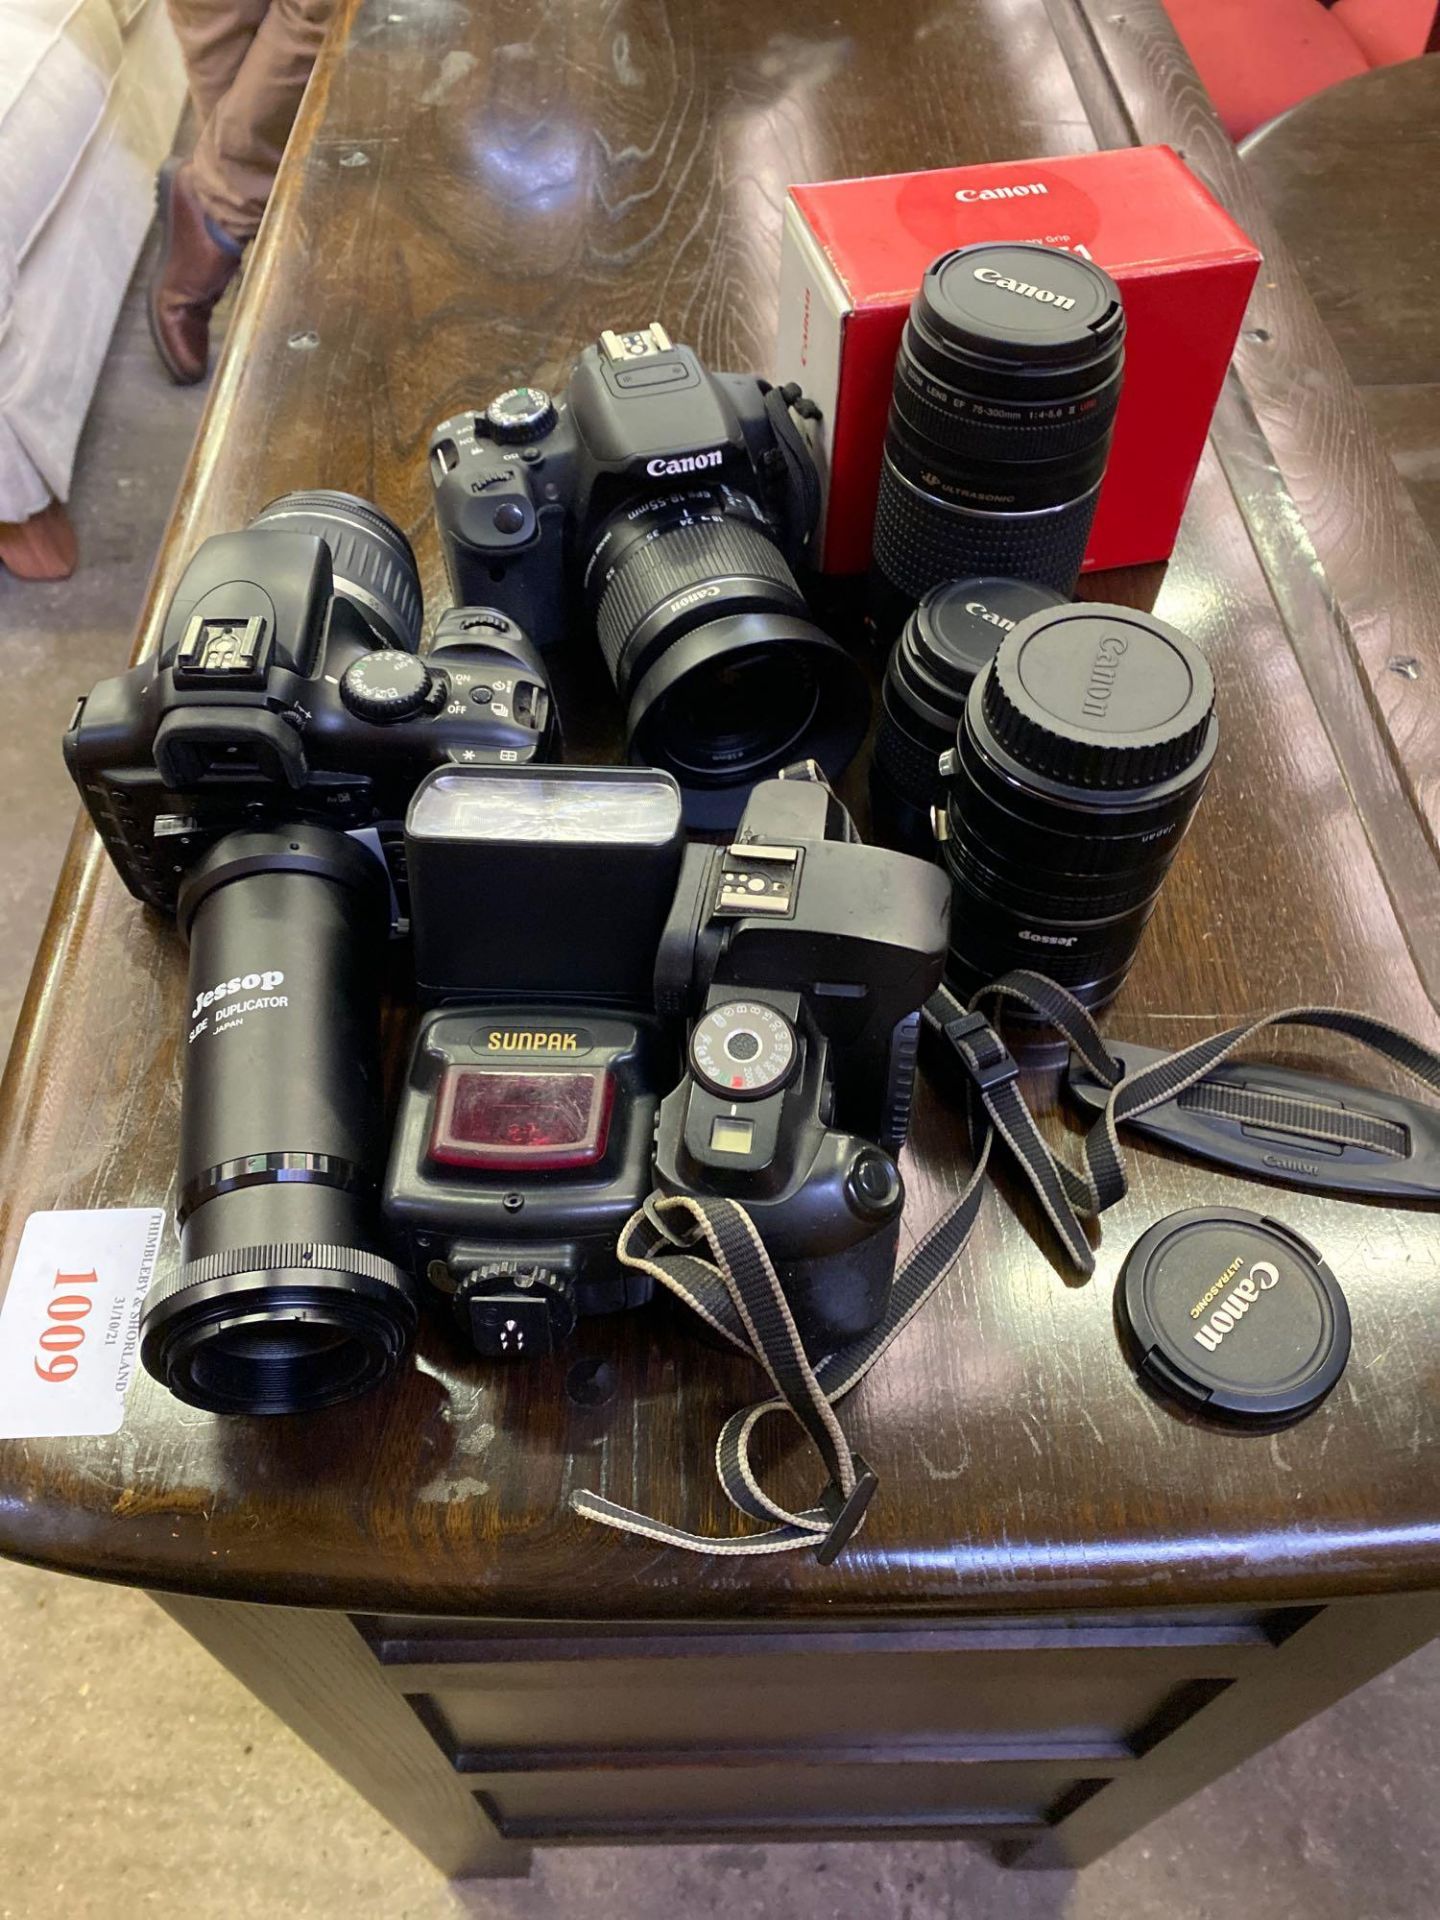 Three Canon EOS cameras with associated lenses and equipment